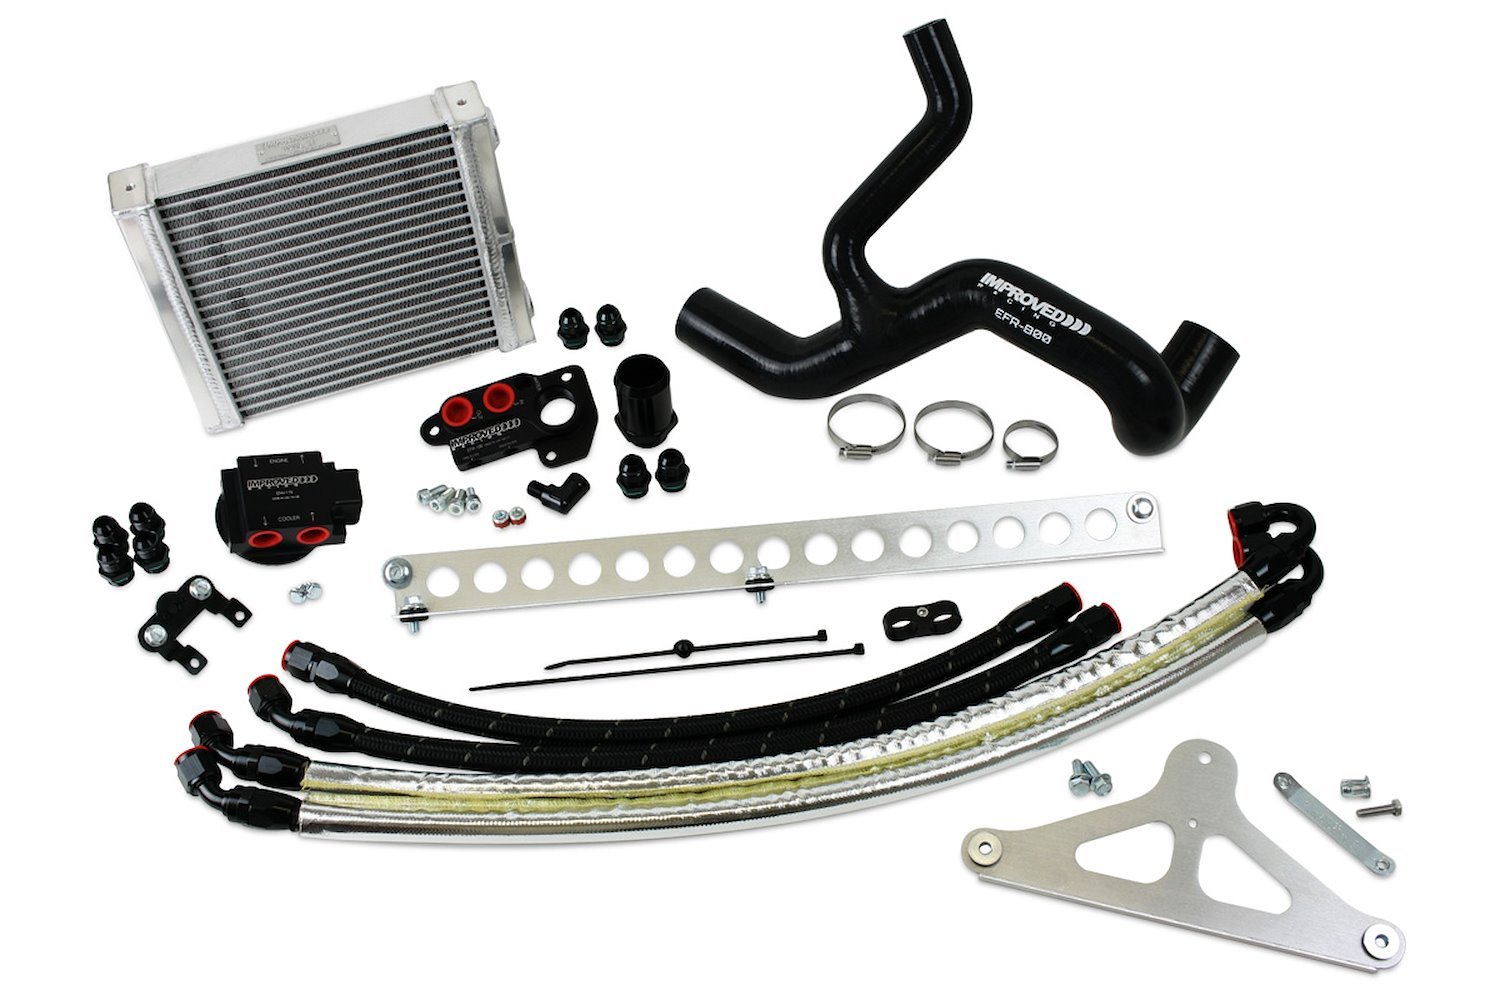 EFR-600-T7 Oil Cooler & Filter Relocation Kit, 1996-2004 Ford Mustang GT, 212-degrees F